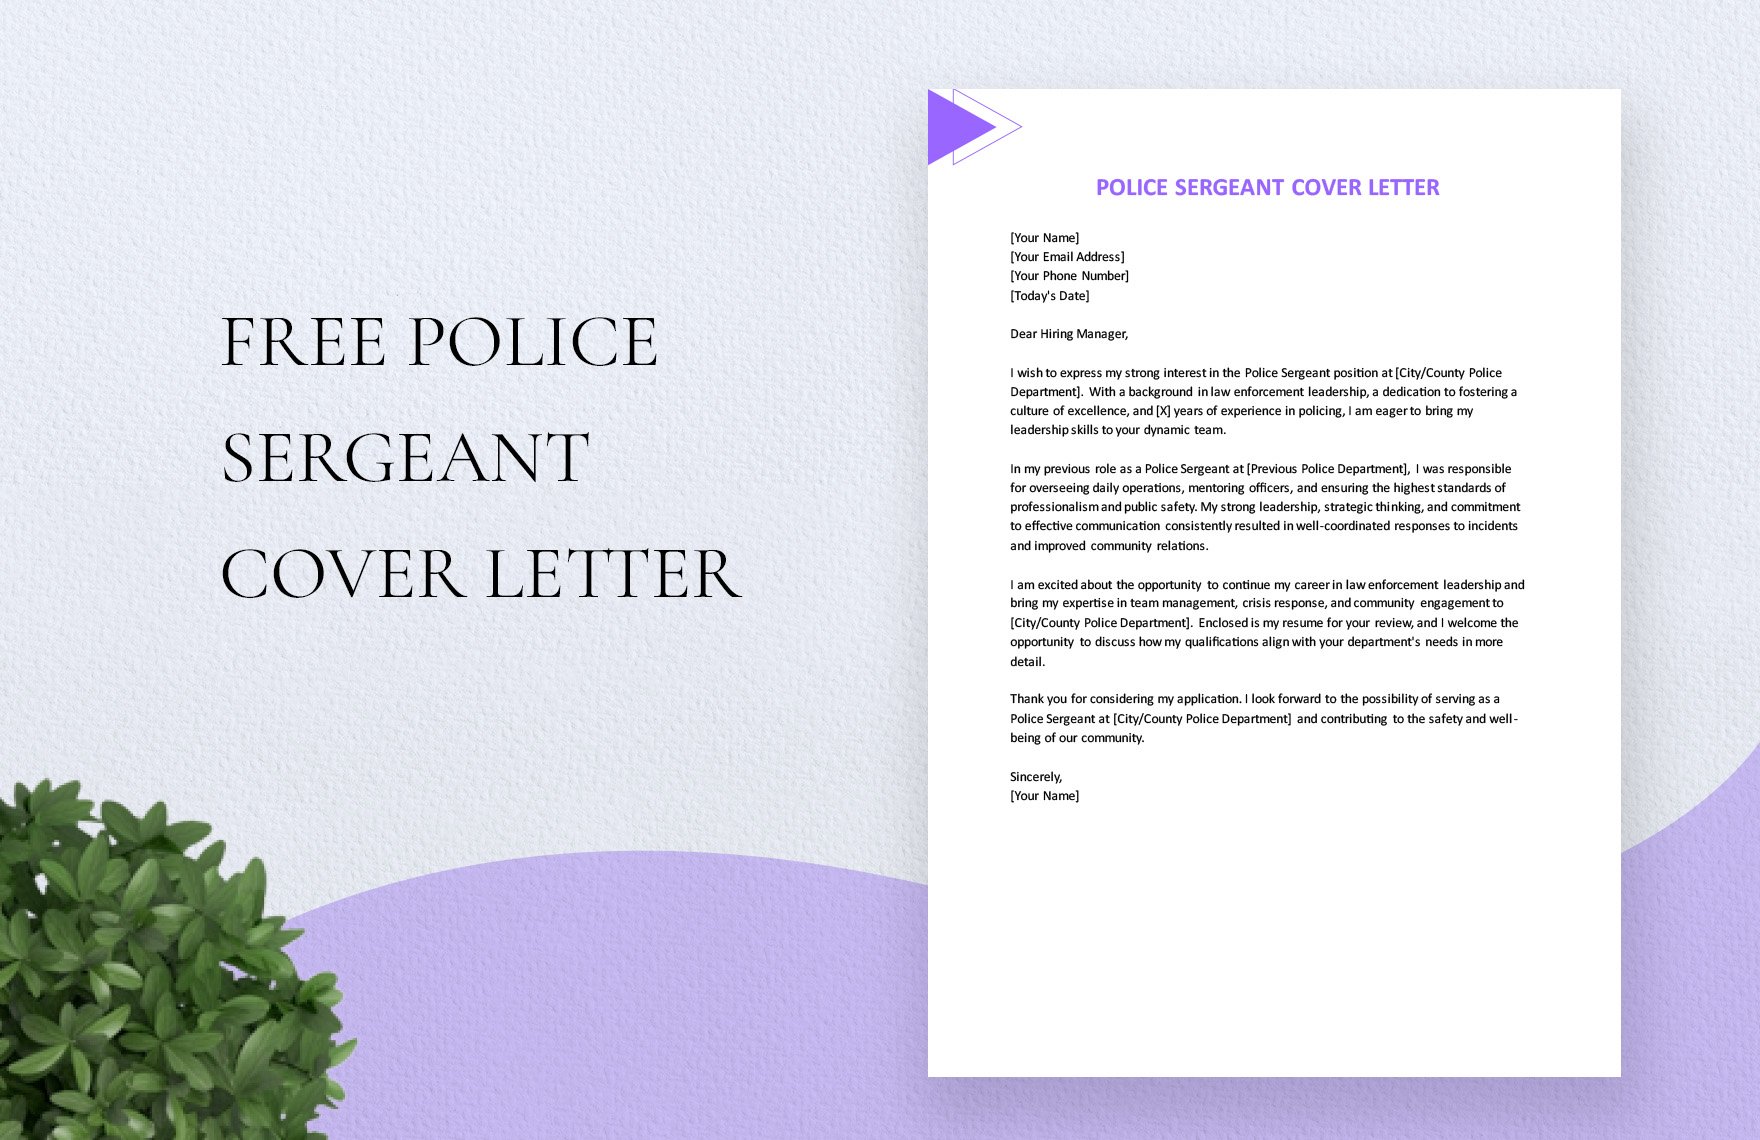 Police Sergeant Cover Letter in Word, Google Docs, PDF